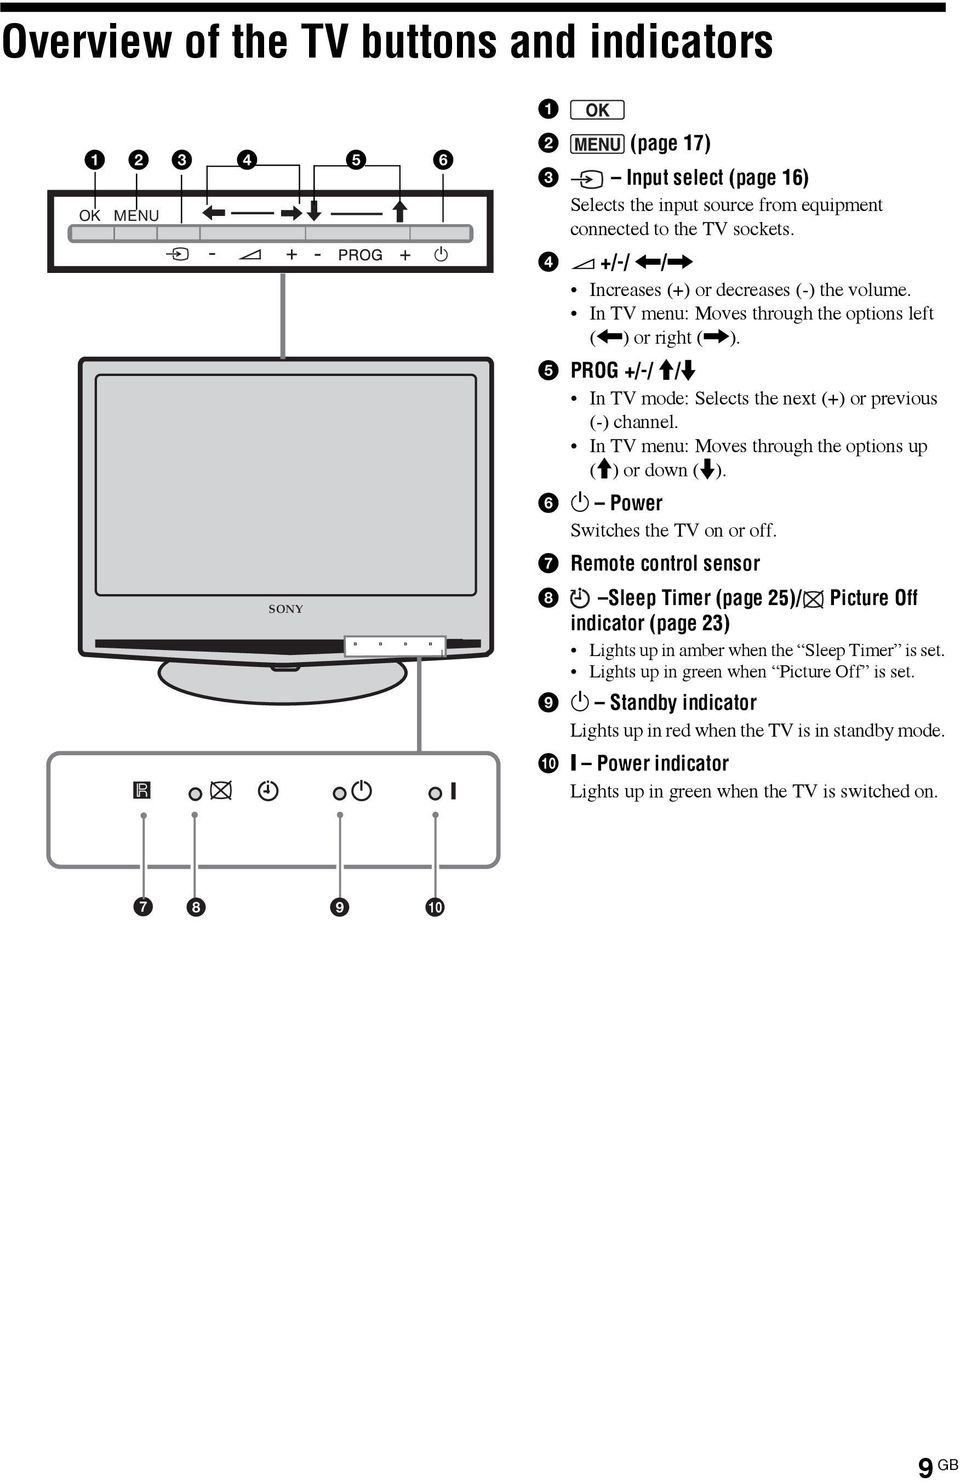 In TV menu: Moves through the options up (M) or down (m). 6 1 Power Switches the TV on or off.